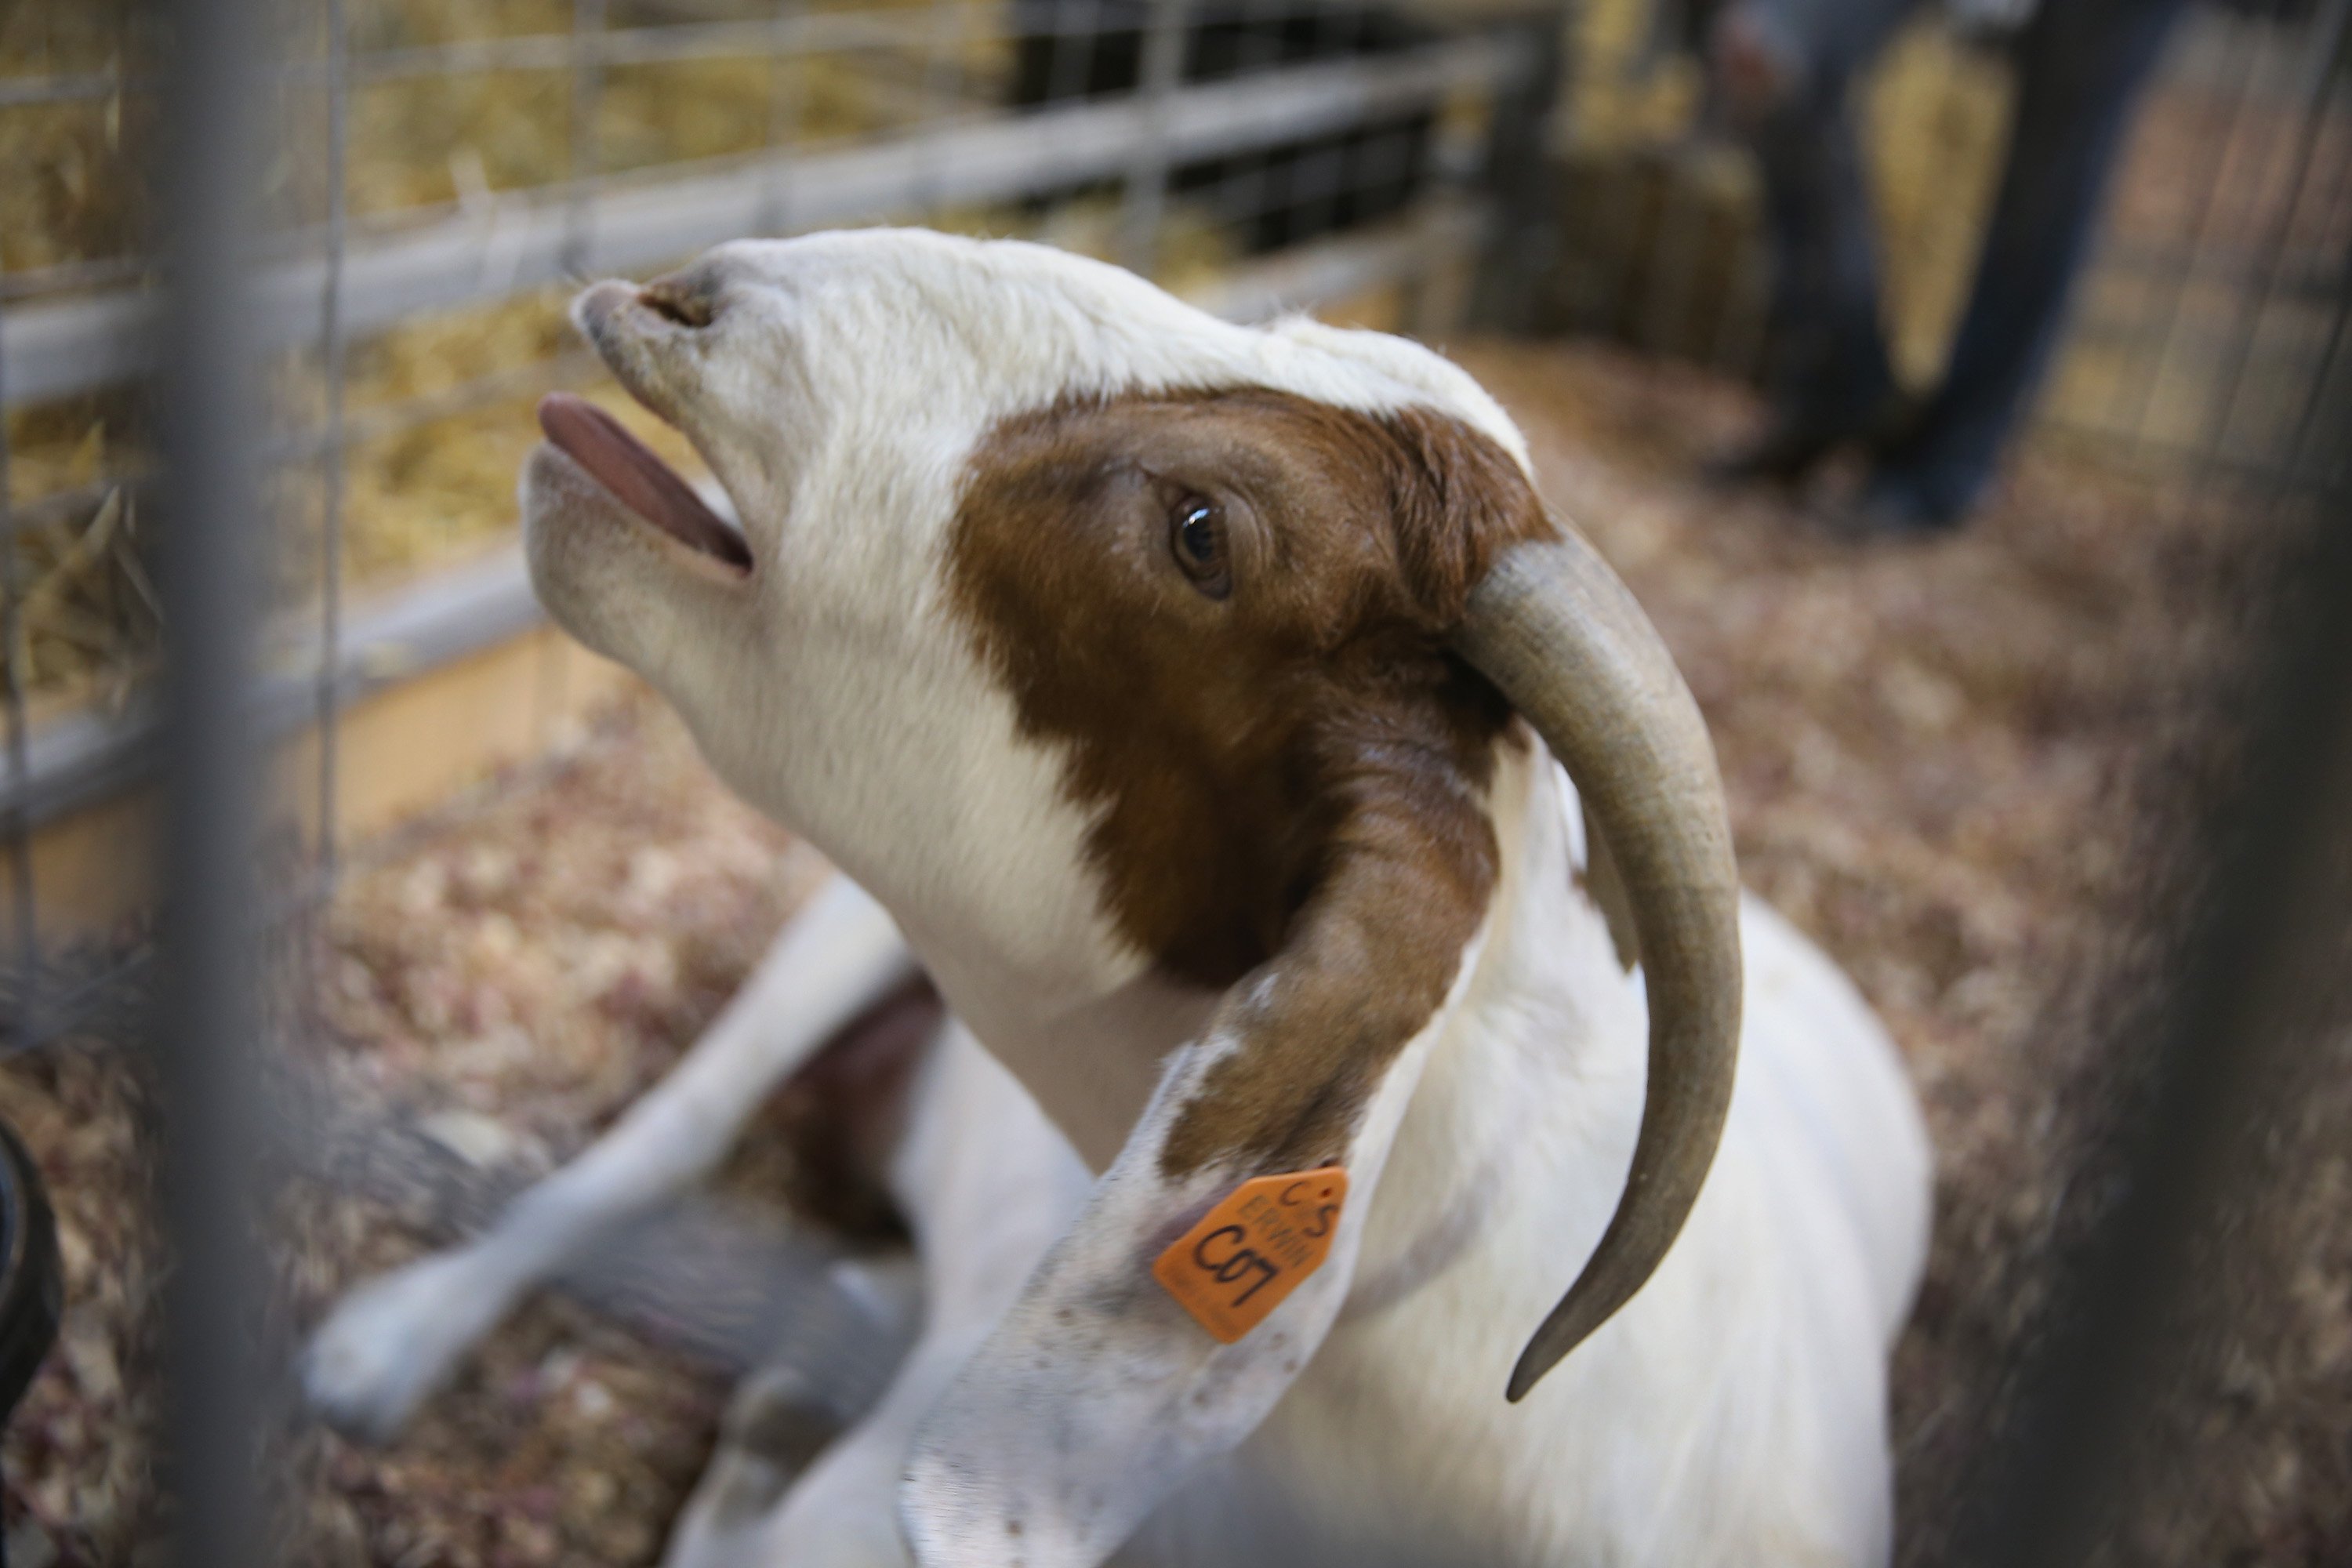 A goat gives birth at the Iowa State Fair on August 6, 2014 in Des Moines, Iowa.